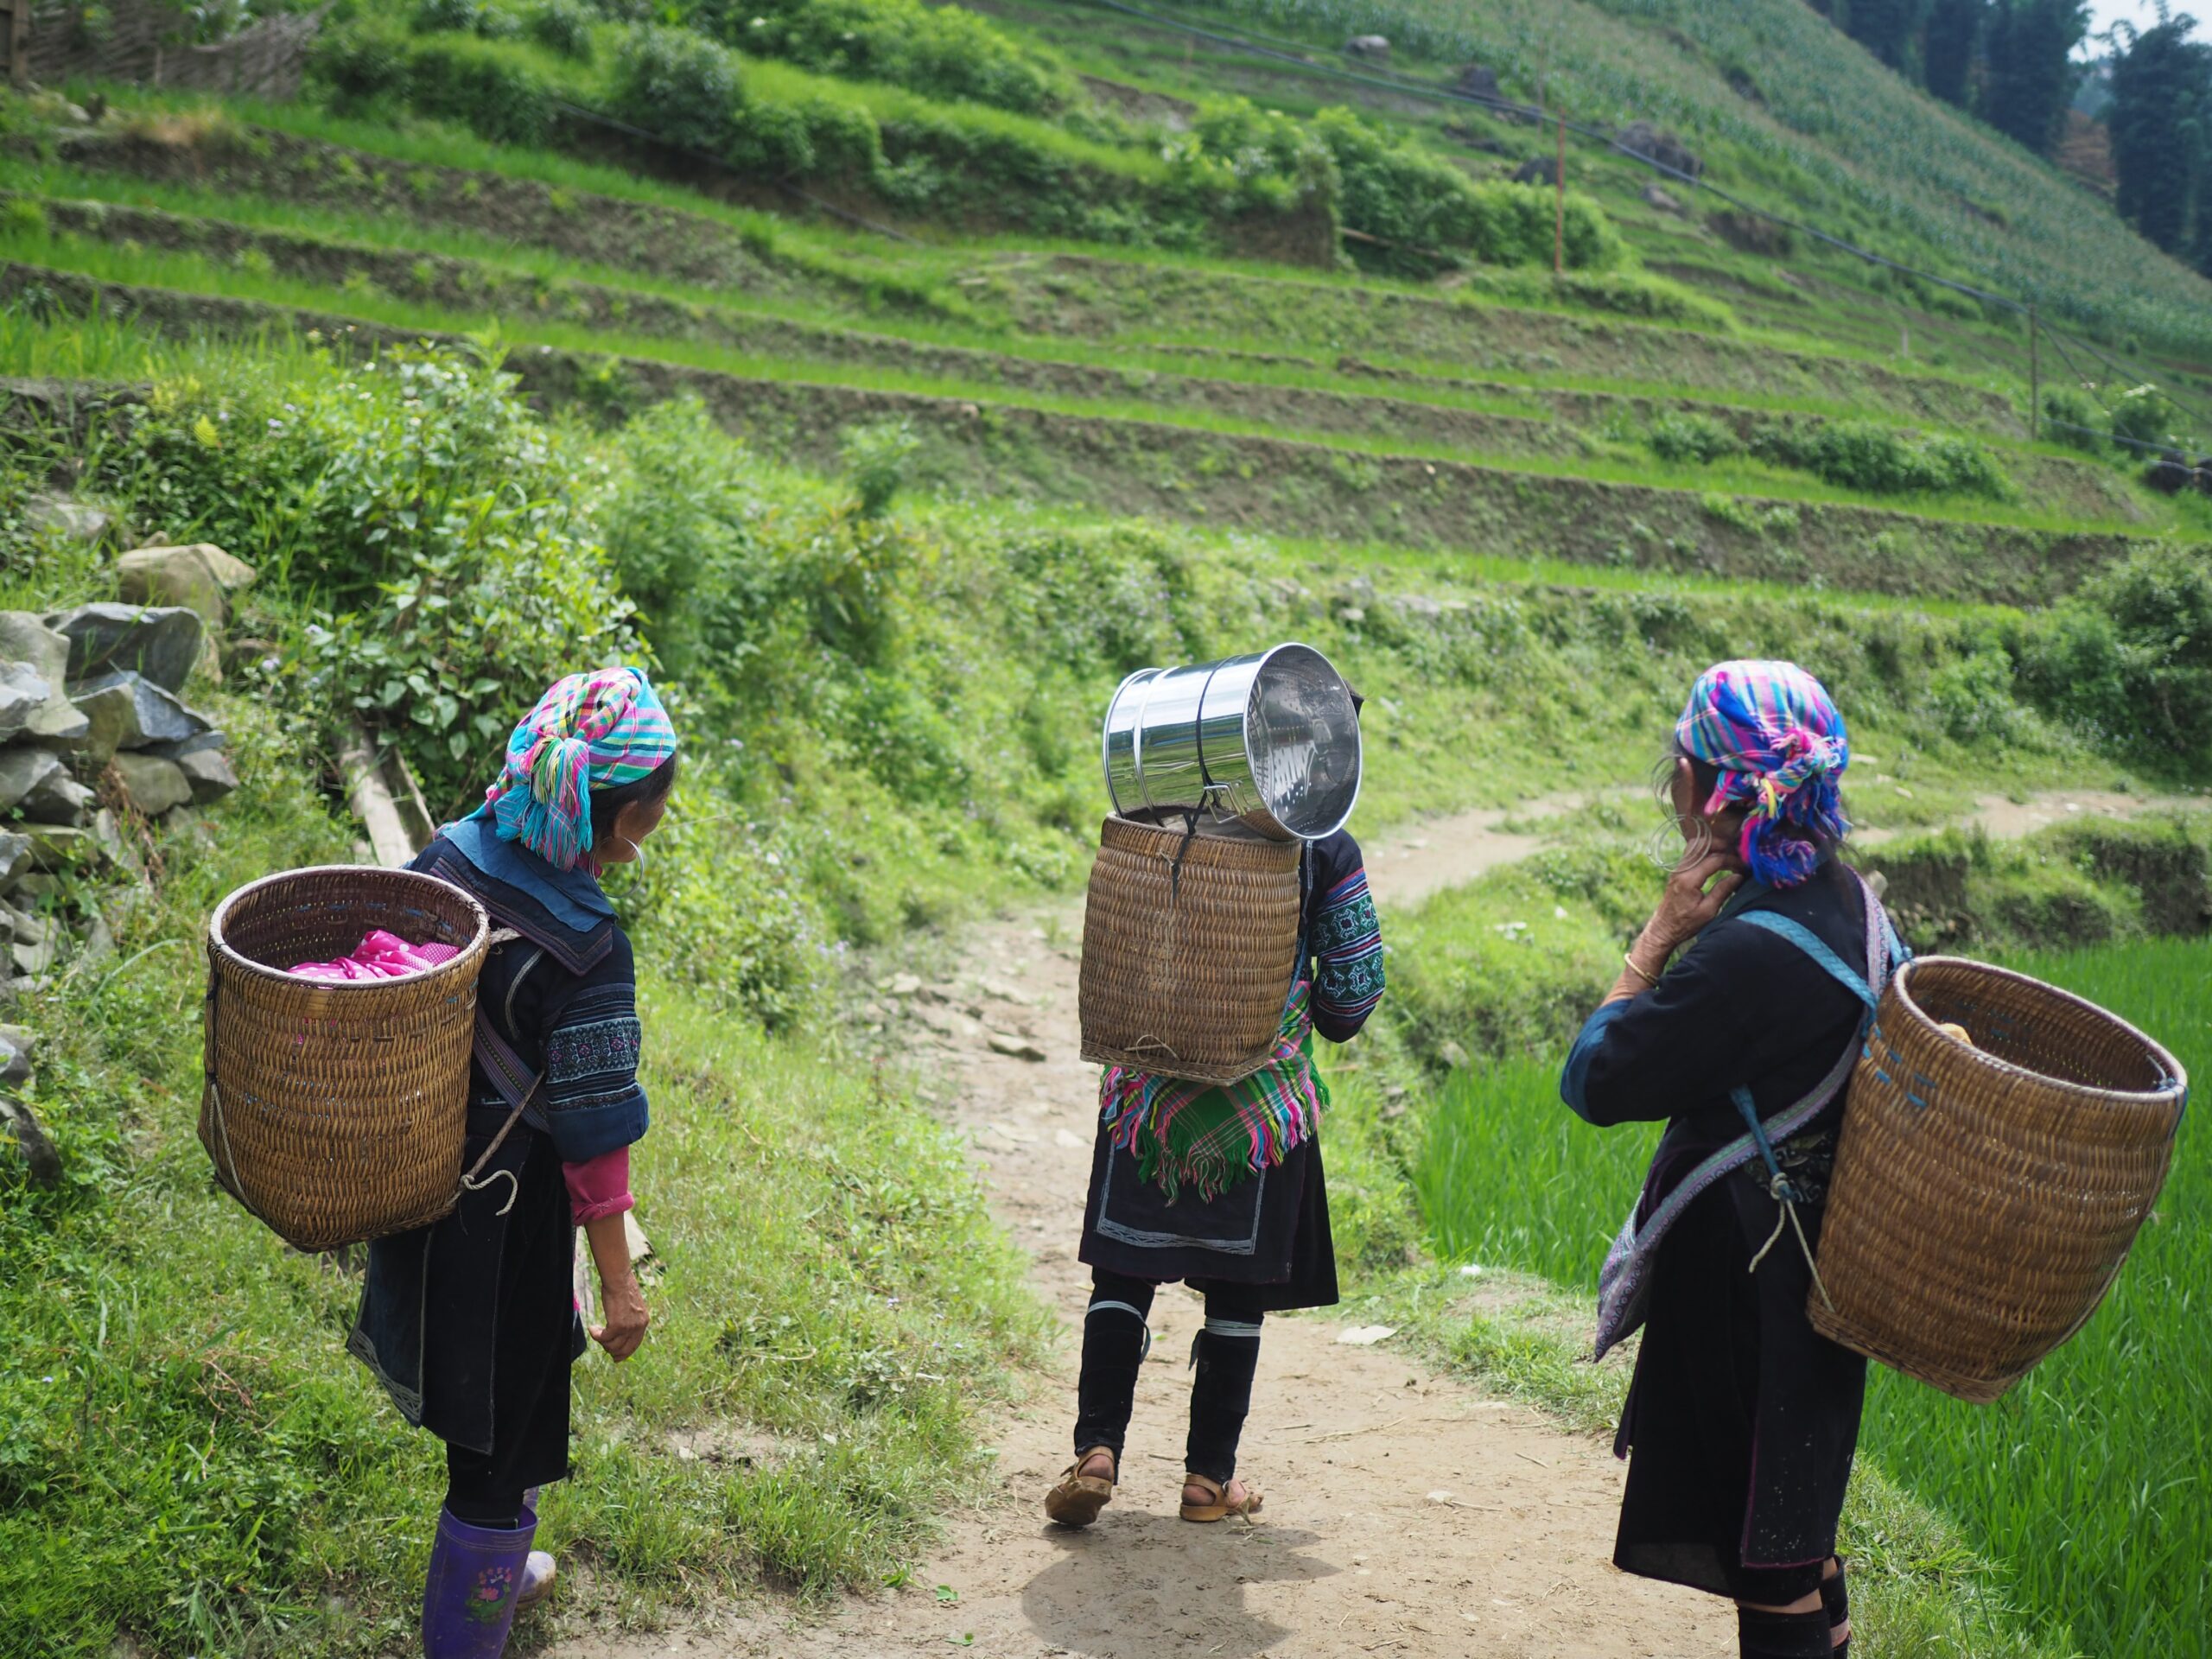 Three women carrying baskets on their backs in a field